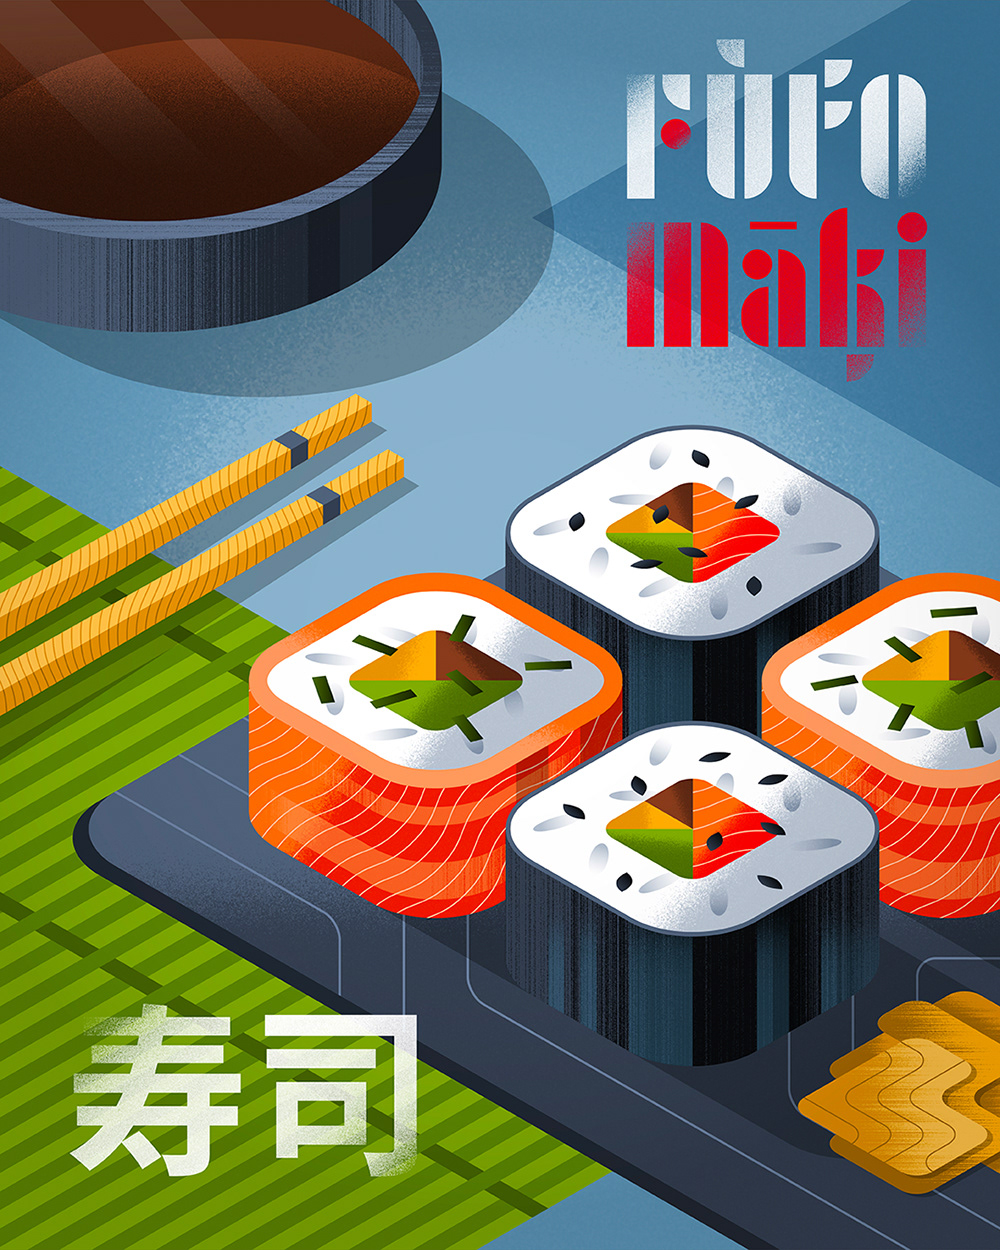 Isometric sushi illustration for poster design by Adrian Bauer